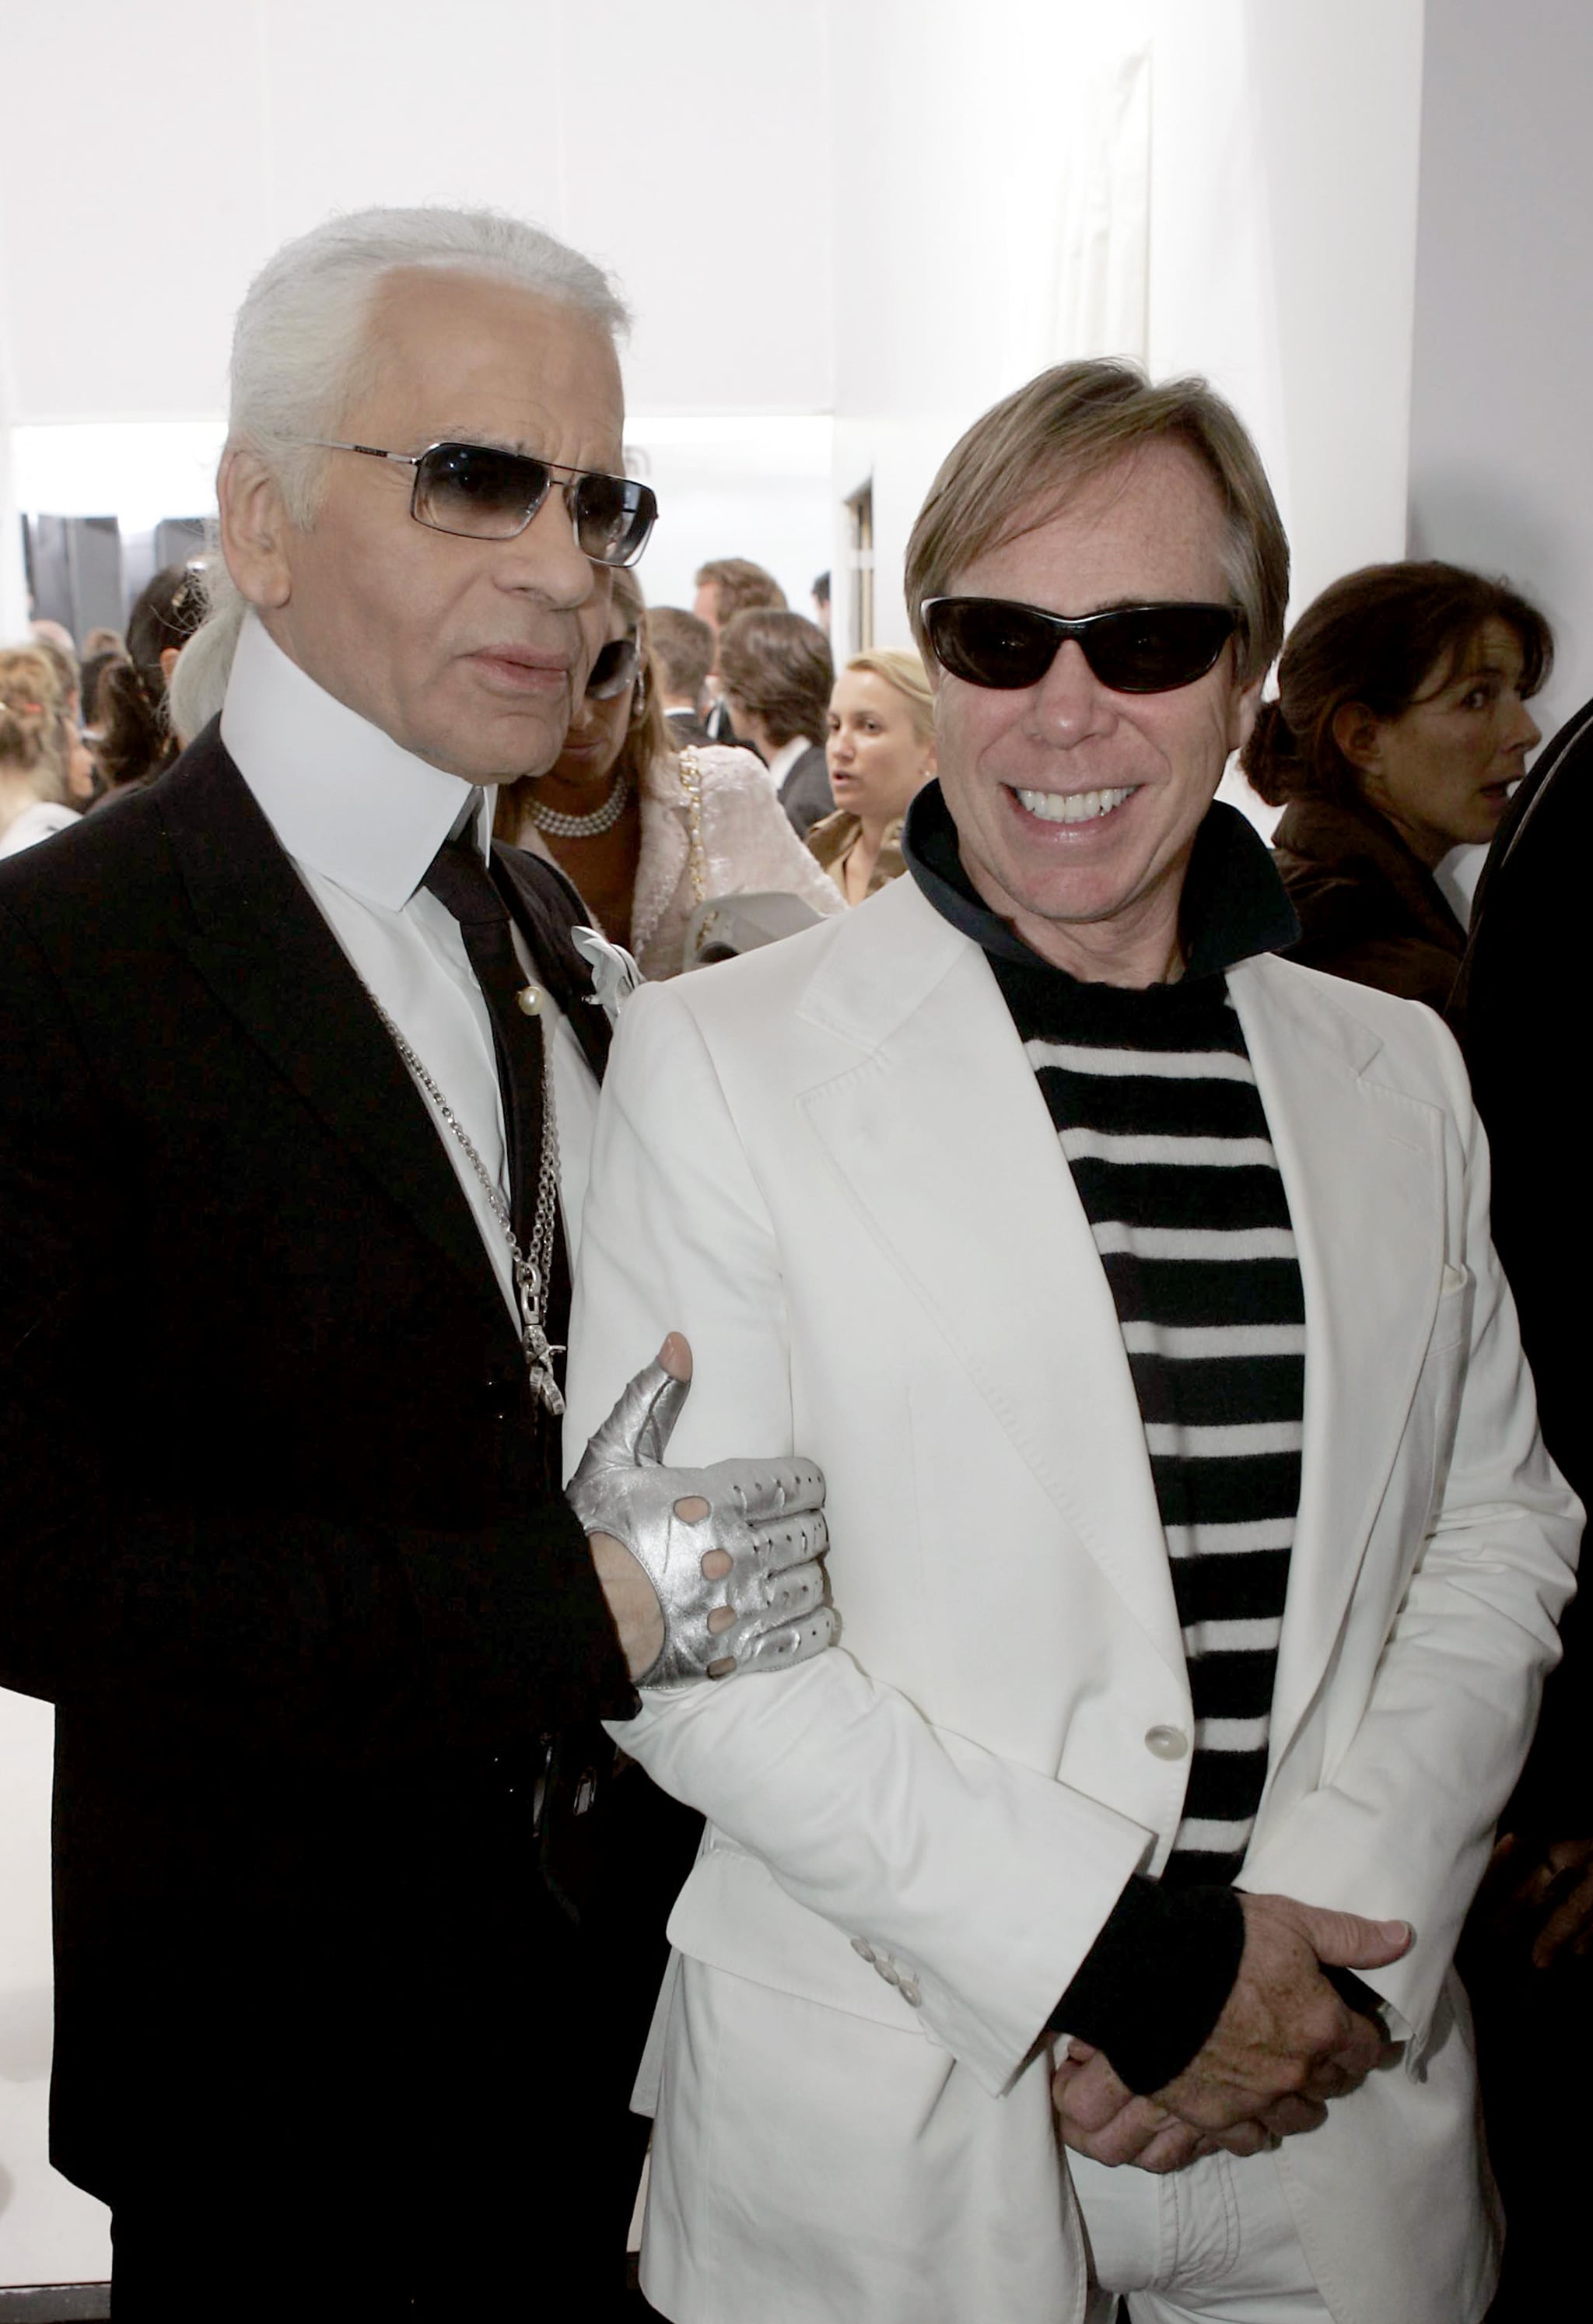 Tommy Hilfiger | The Fashion World Is Saying to Lagerfeld the Only Way They Know | POPSUGAR Fashion Photo 40